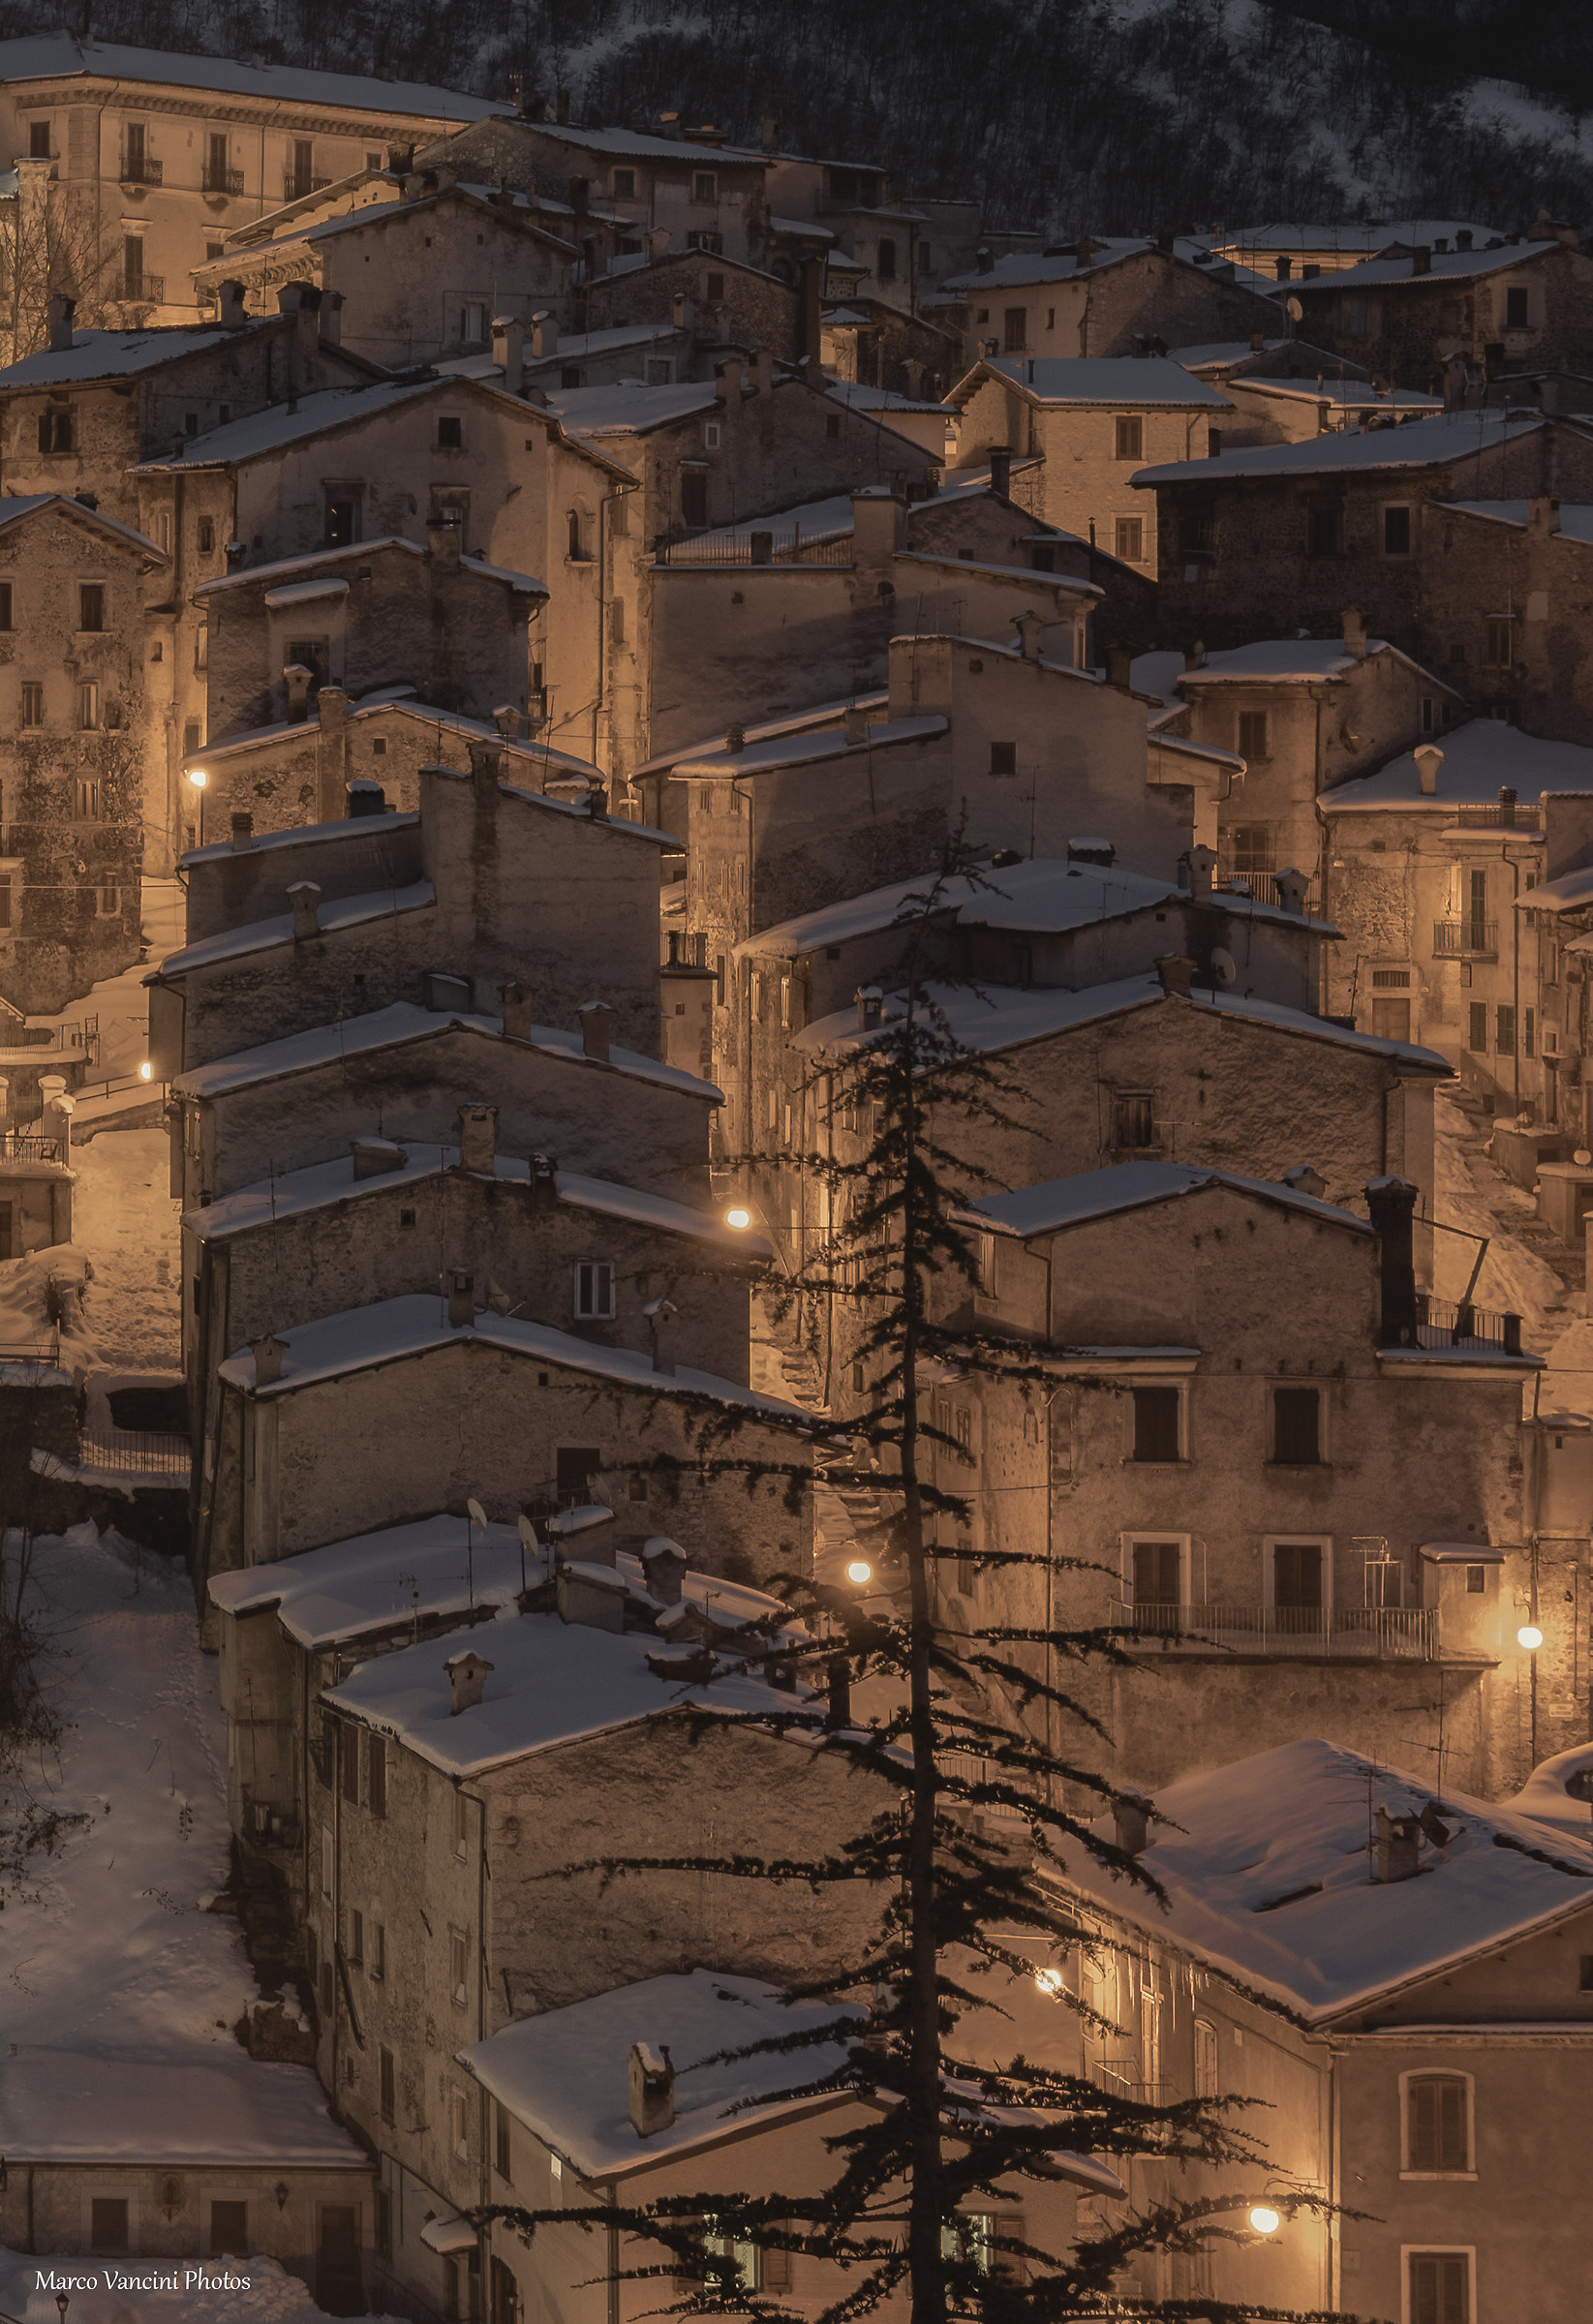 The houses of Scanno...